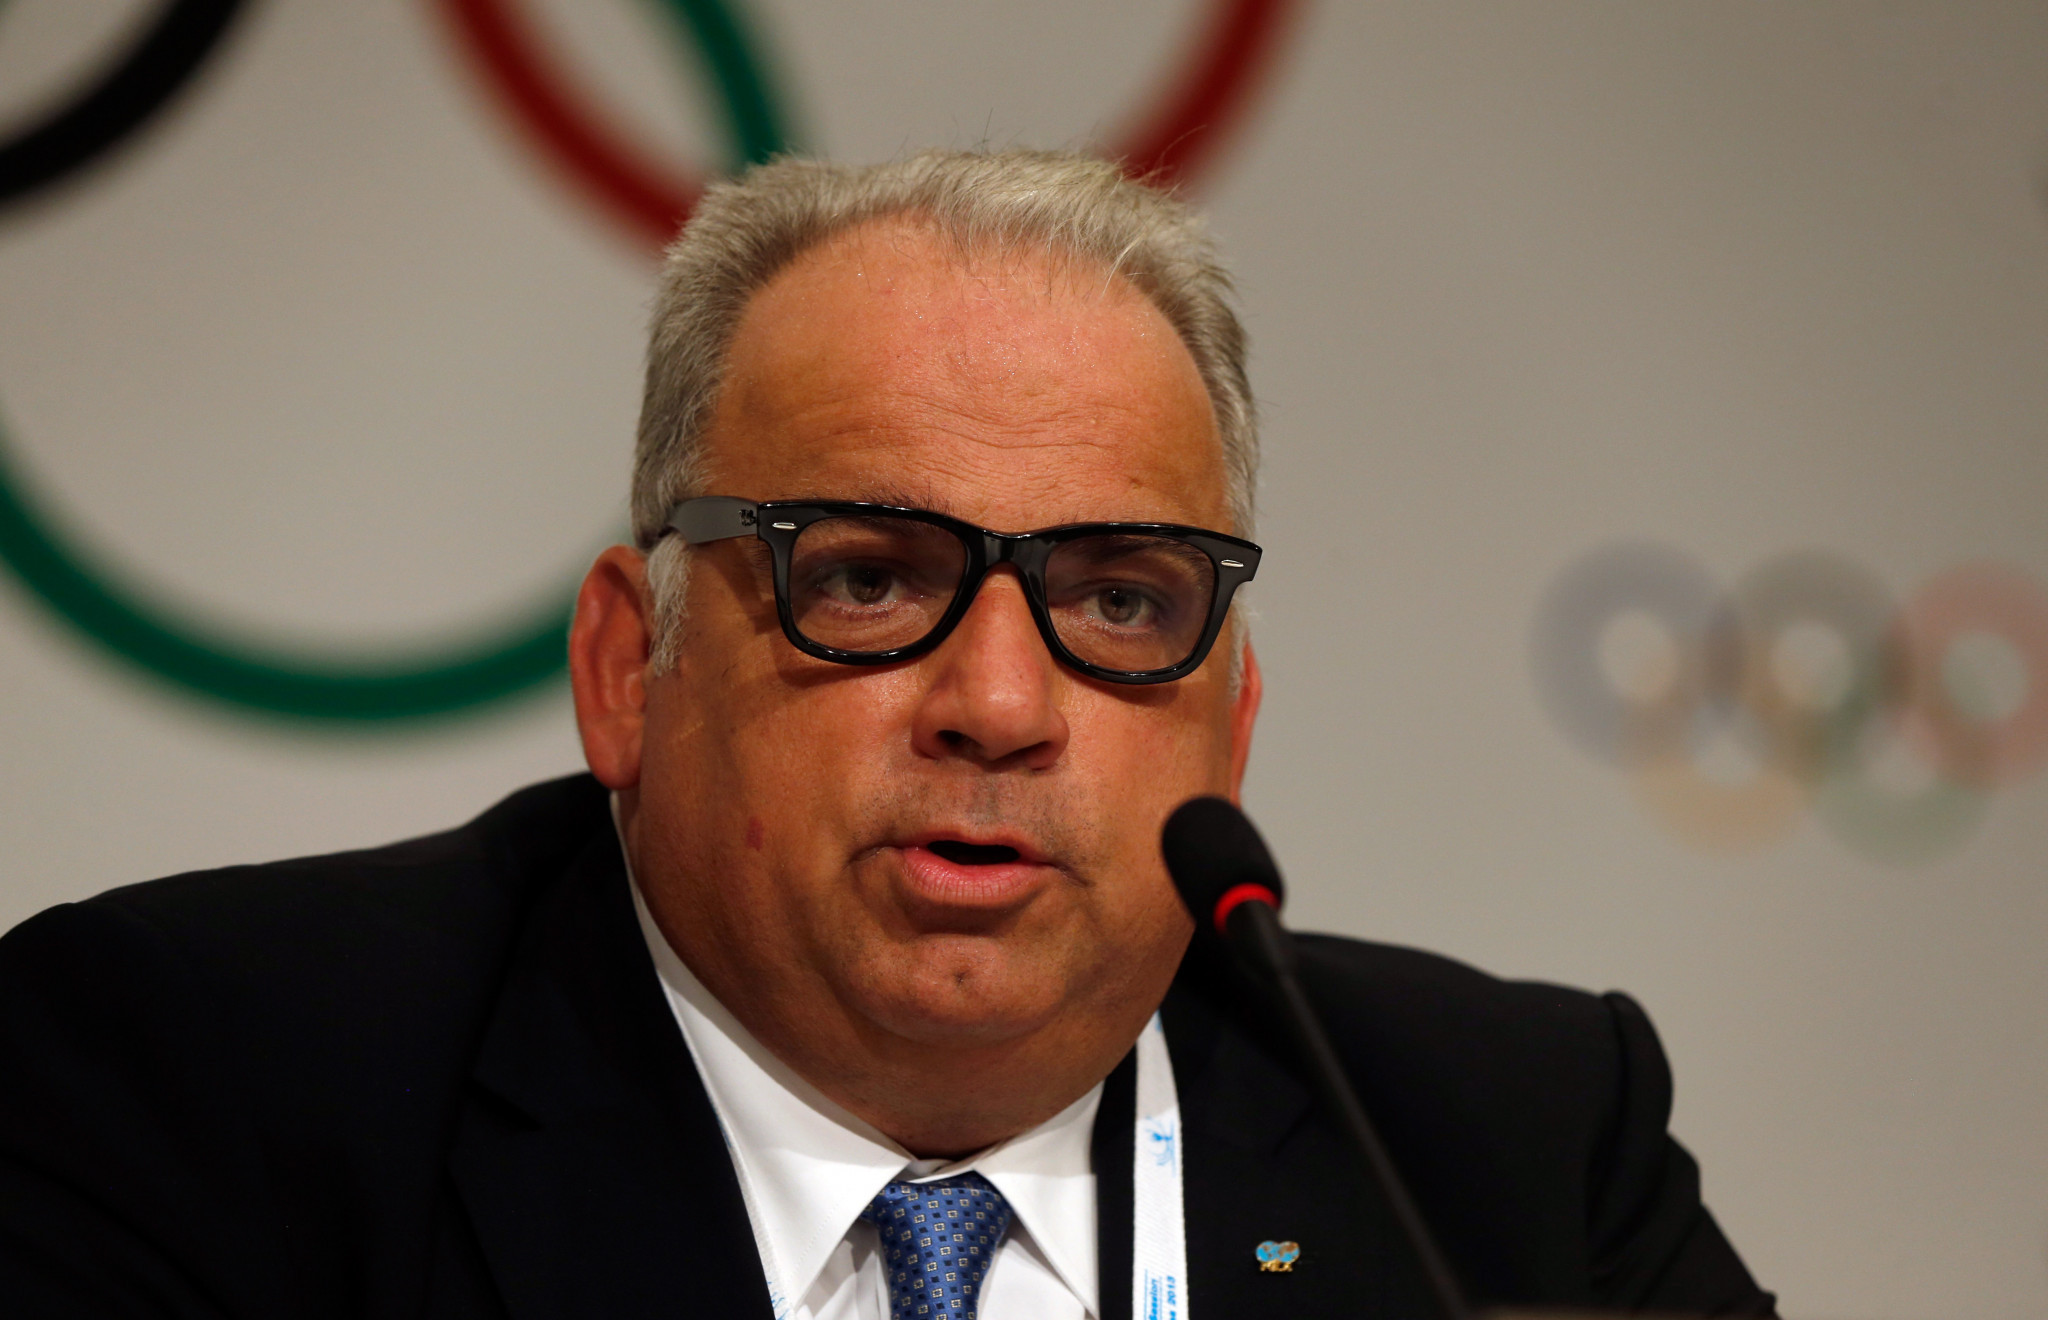 Exclusive: IOC Executive Board member Lalovic backs investigation into Scott bullying claims but questions timing of allegations